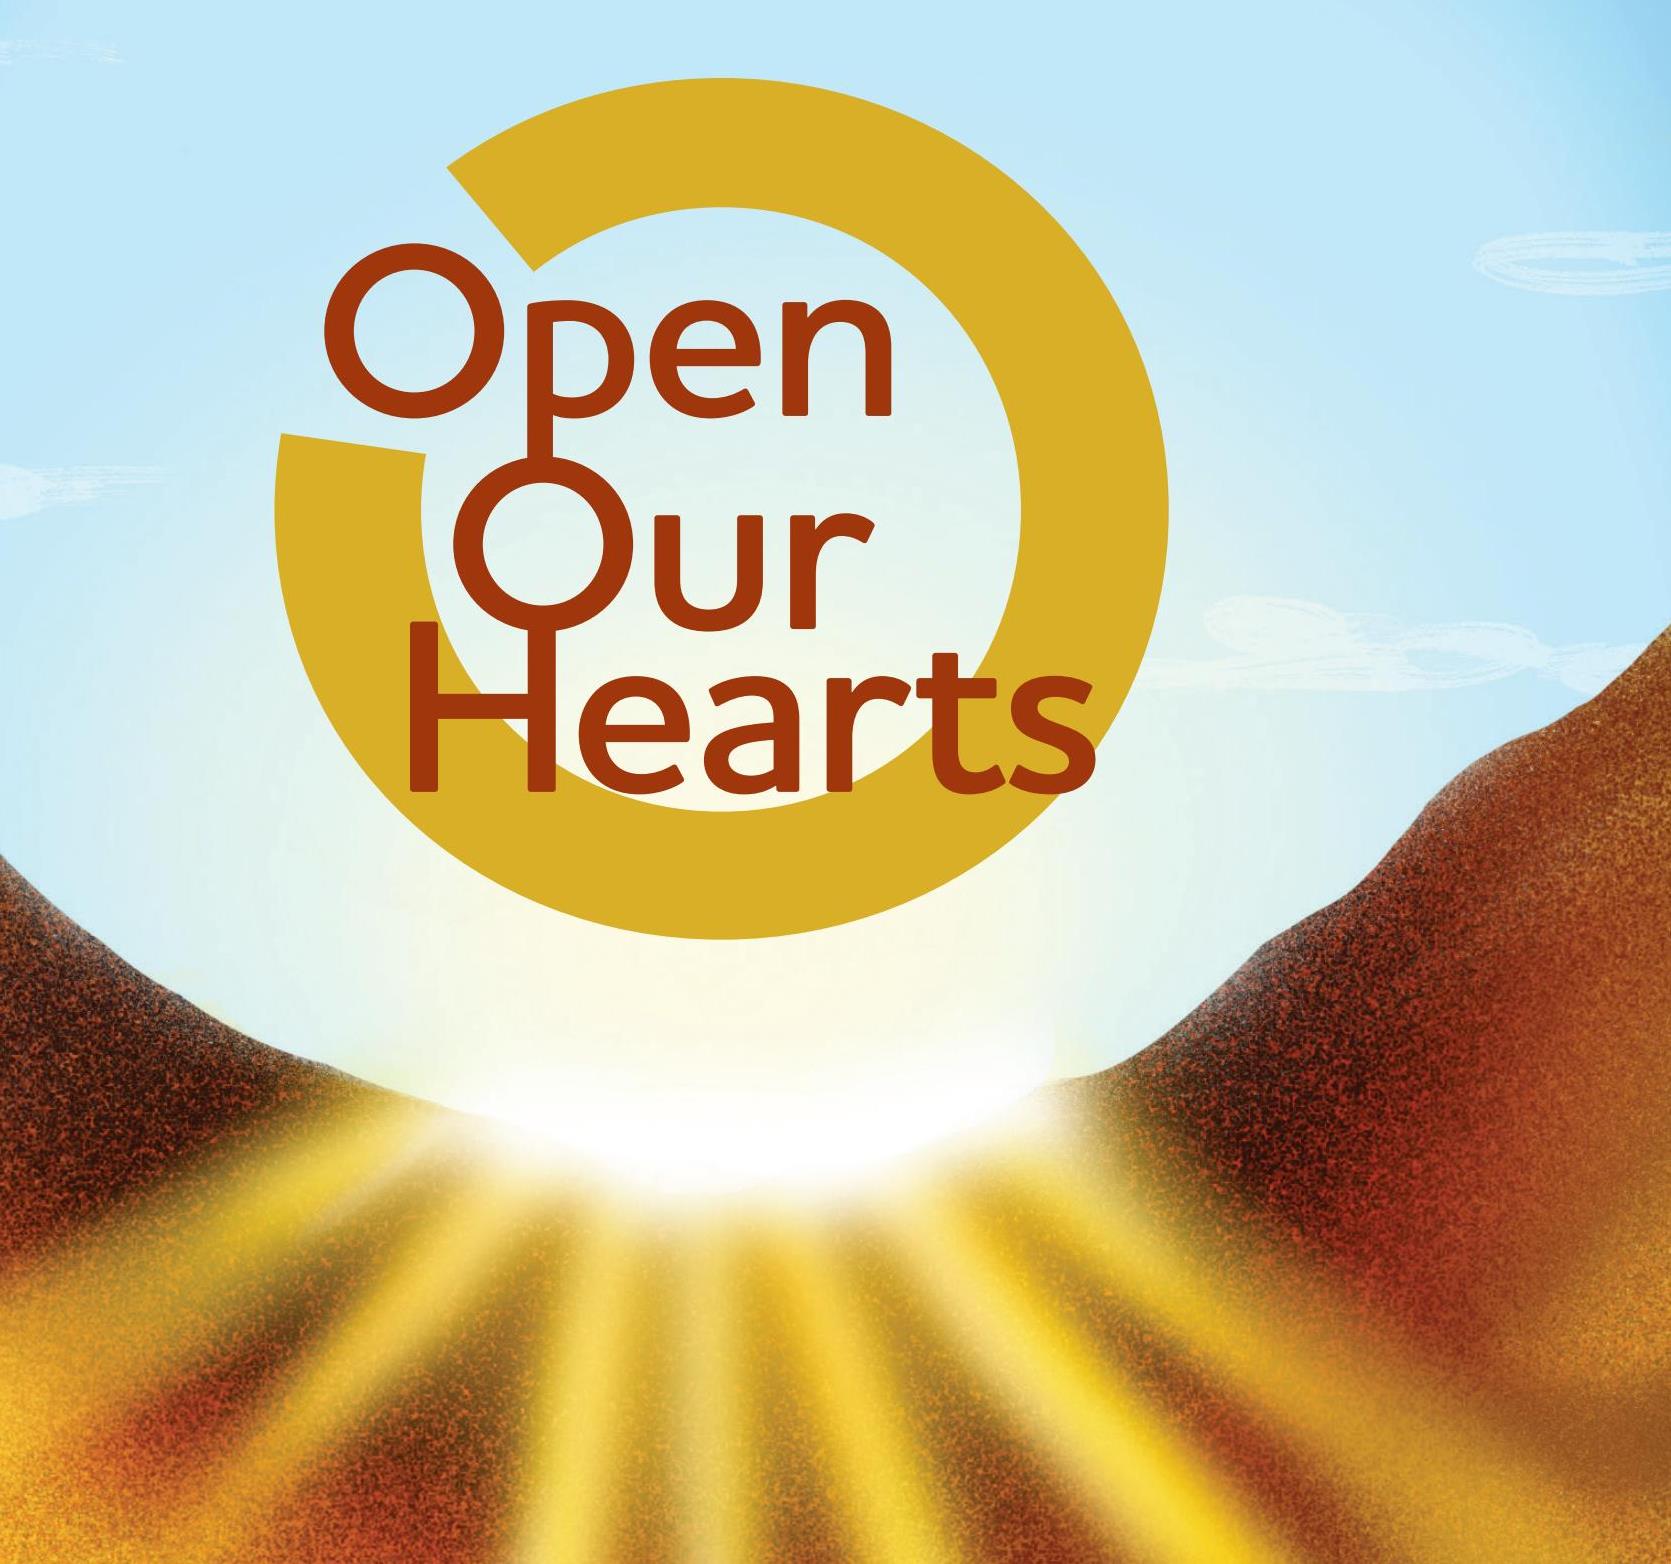 Open our Hearts